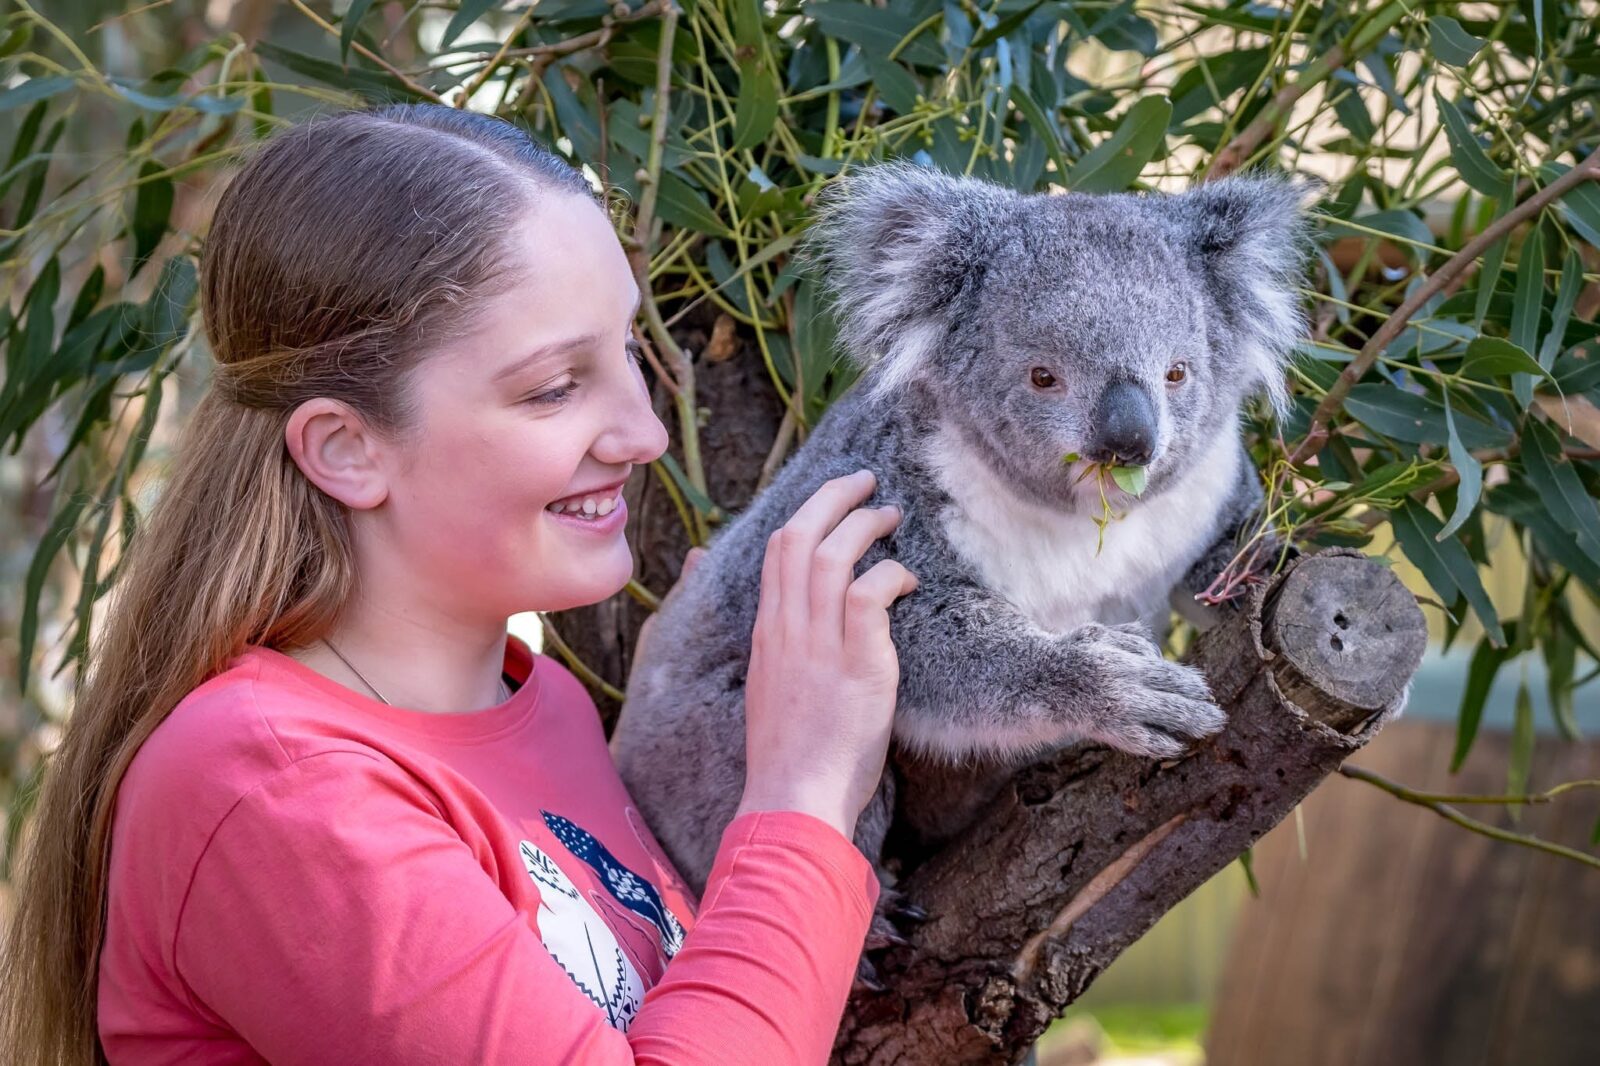 Person with koala, touching it's arm